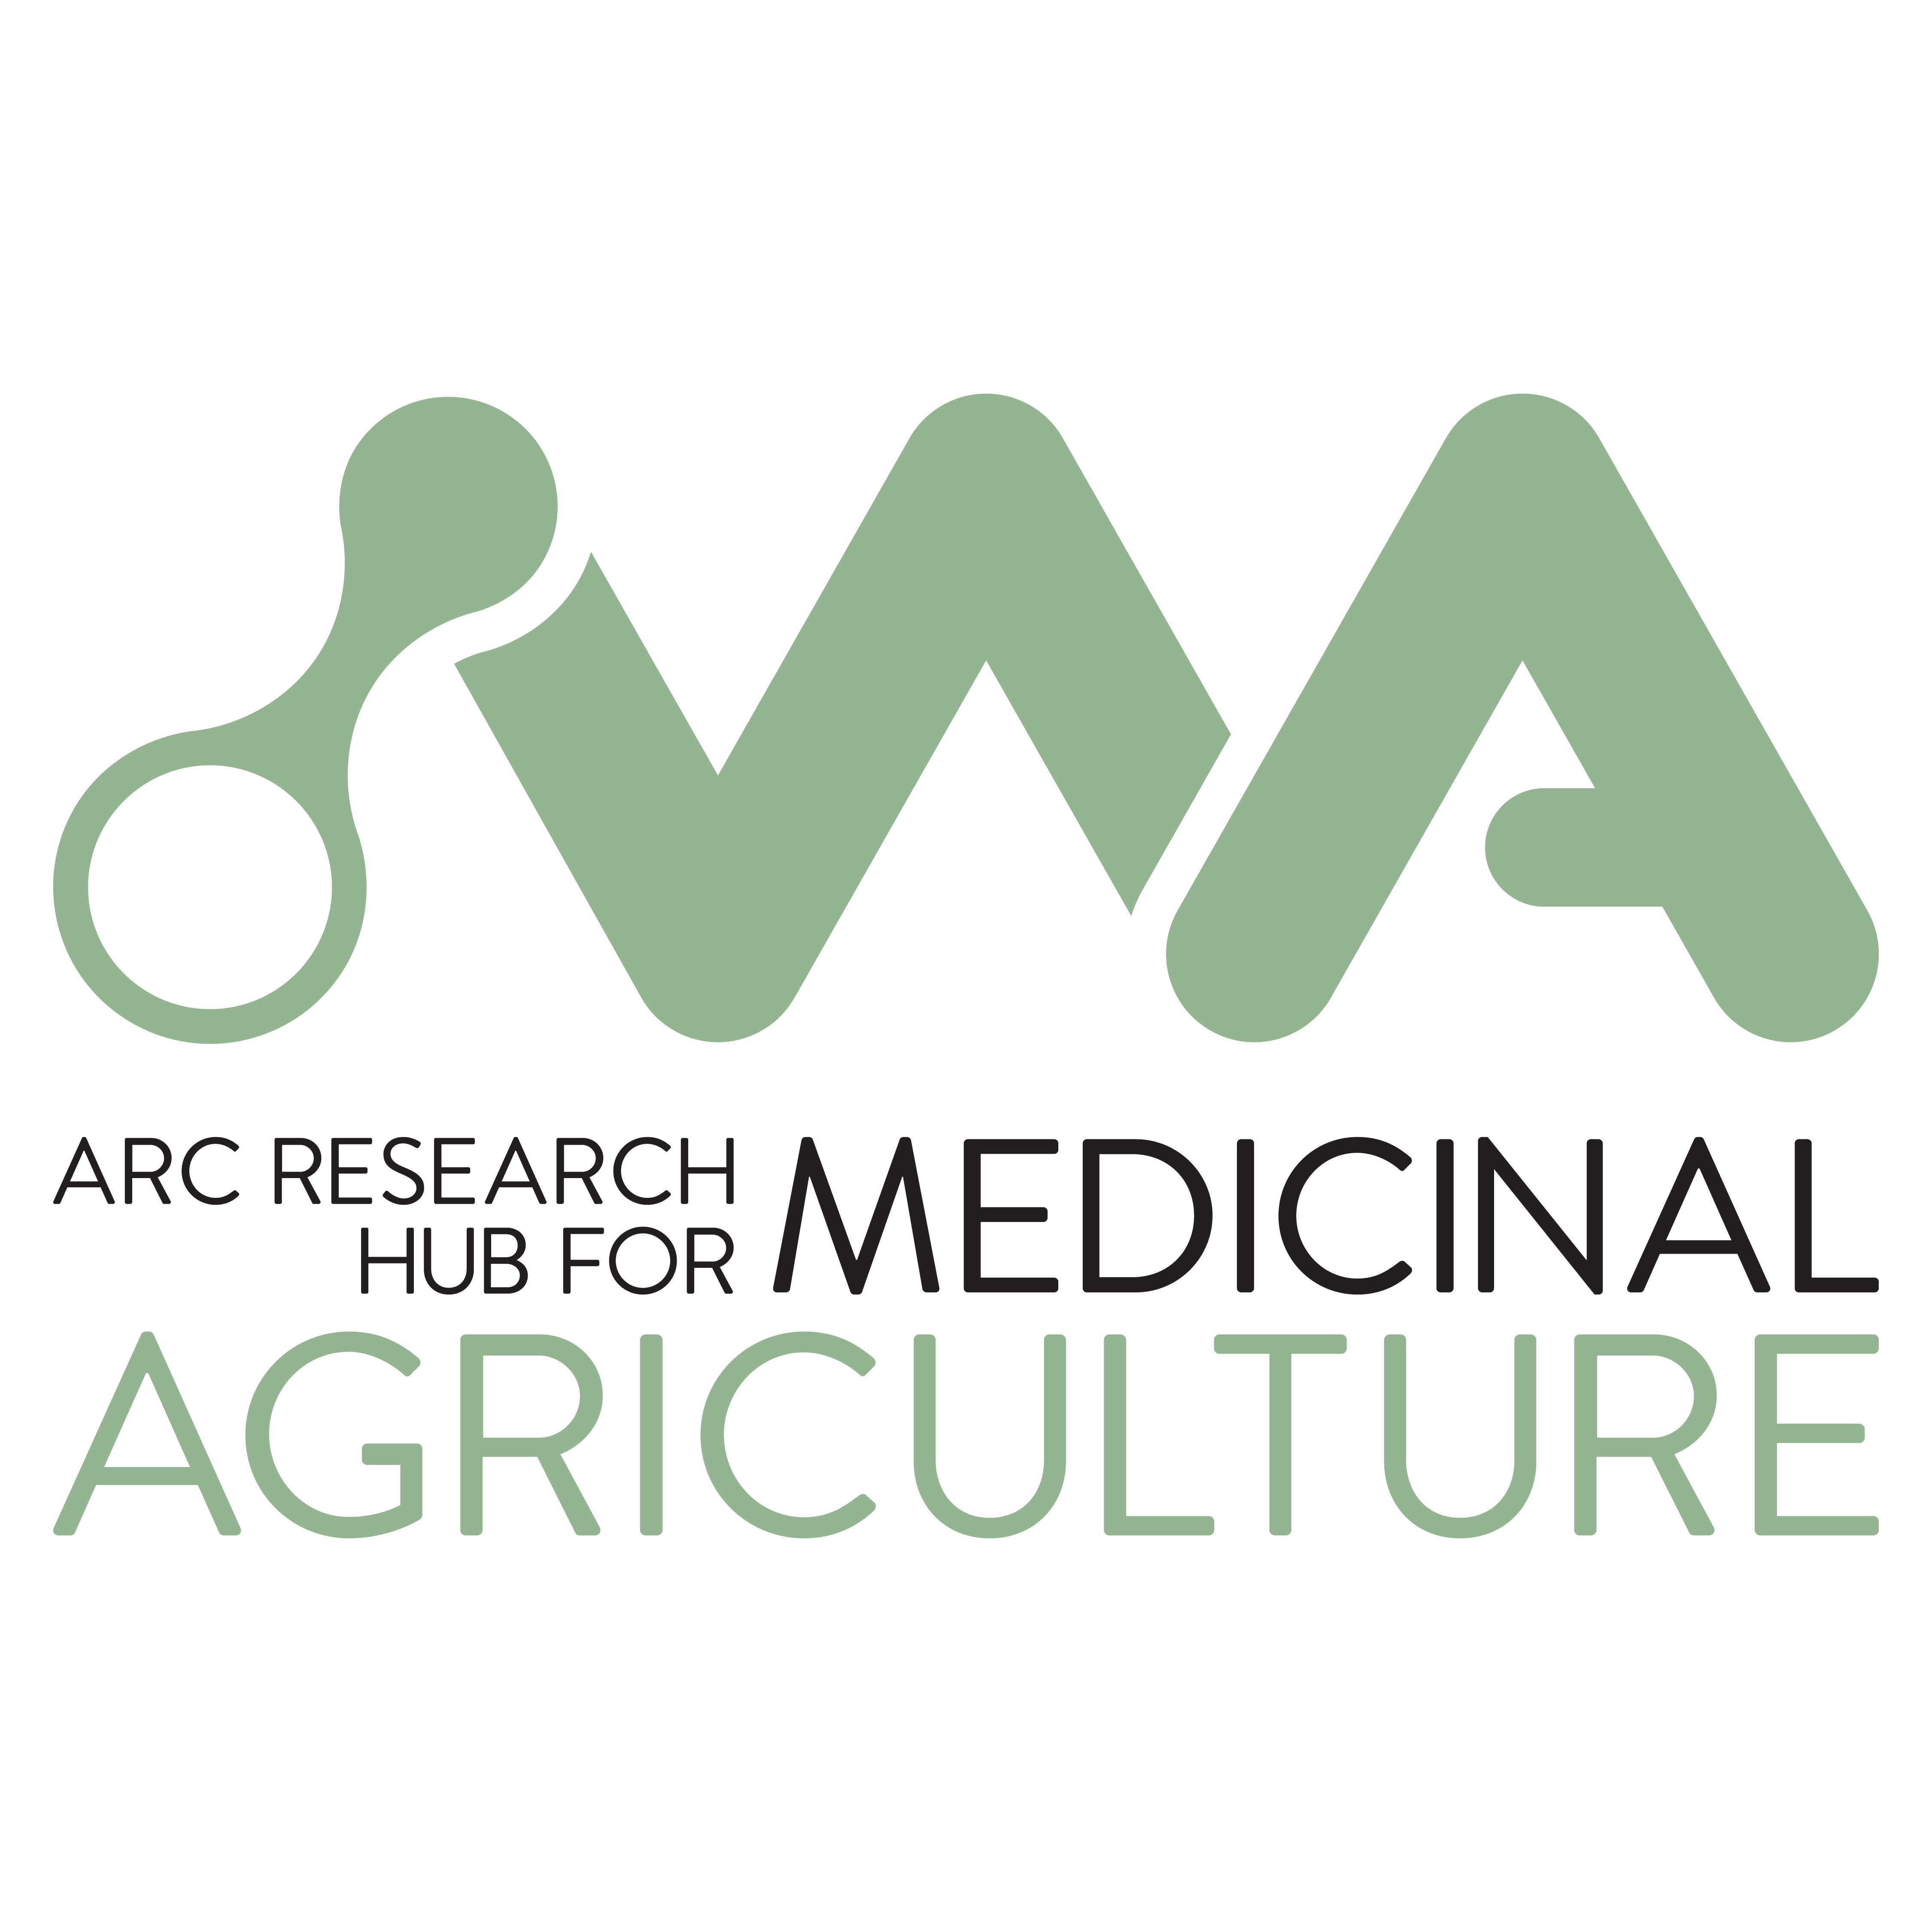 ARC Research Hub for Medicinal Agriculture